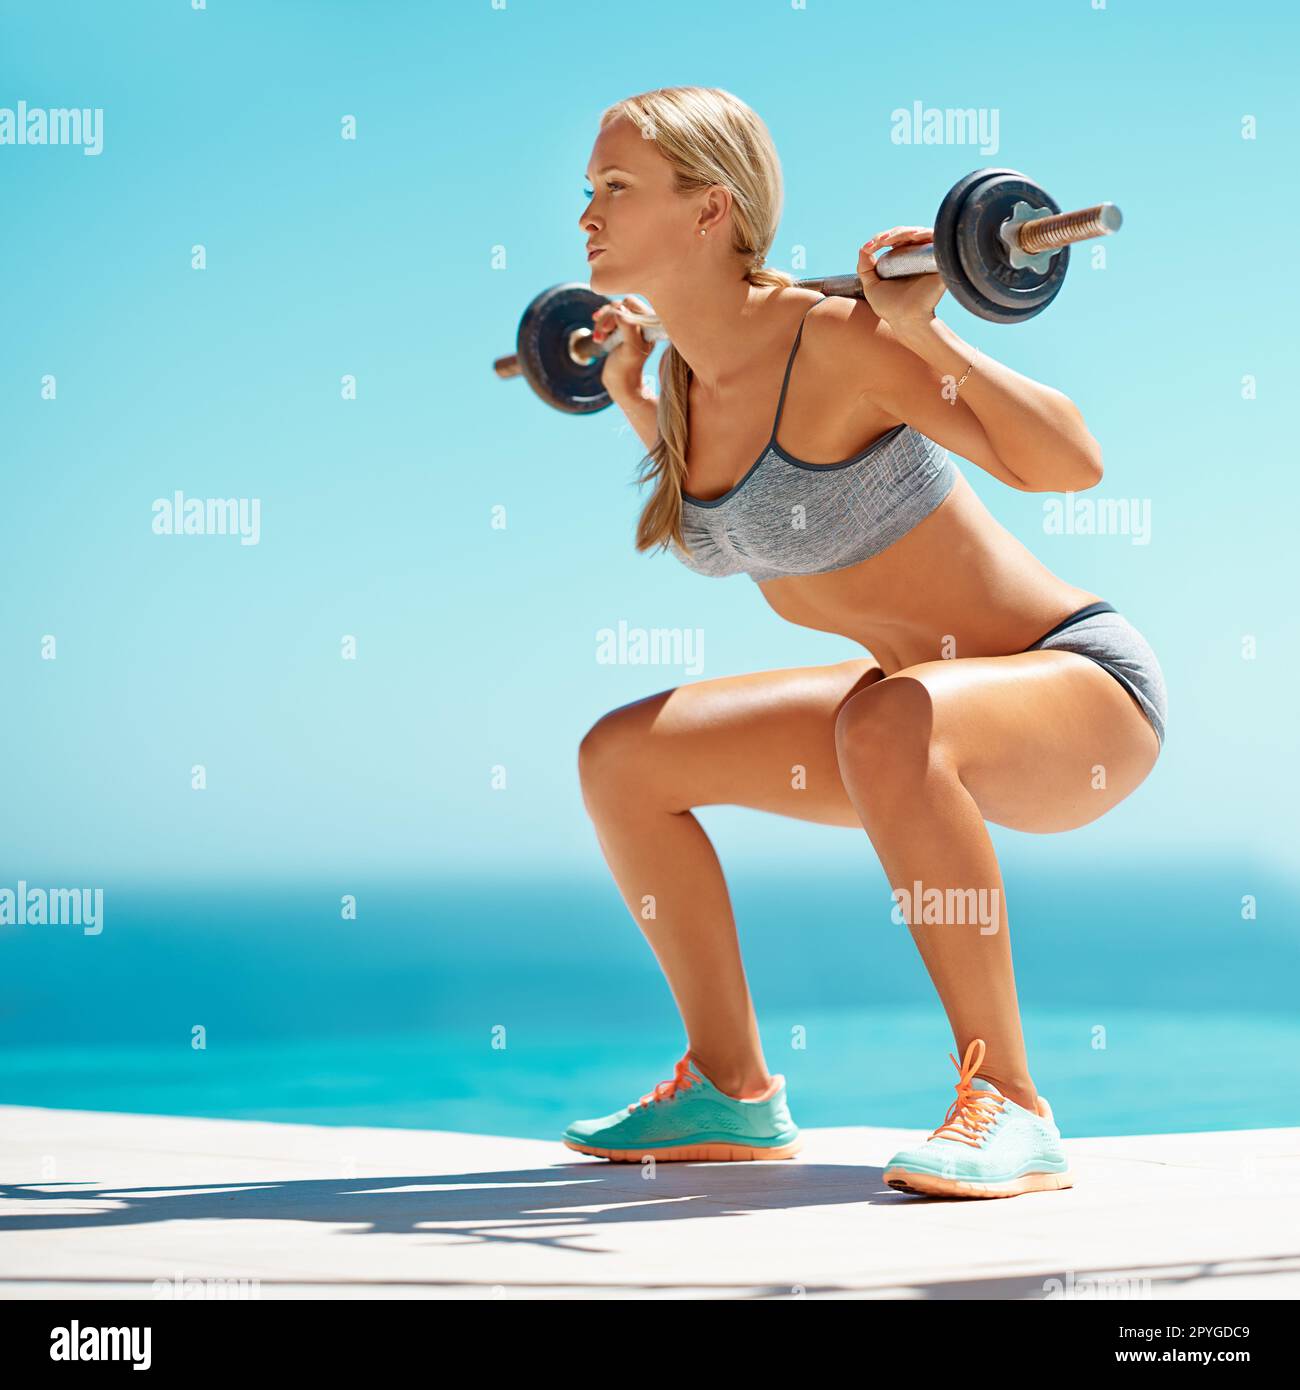 Her body screams strength. Full length shot of an attractive young woman doing squats with a barbell outside. Stock Photo